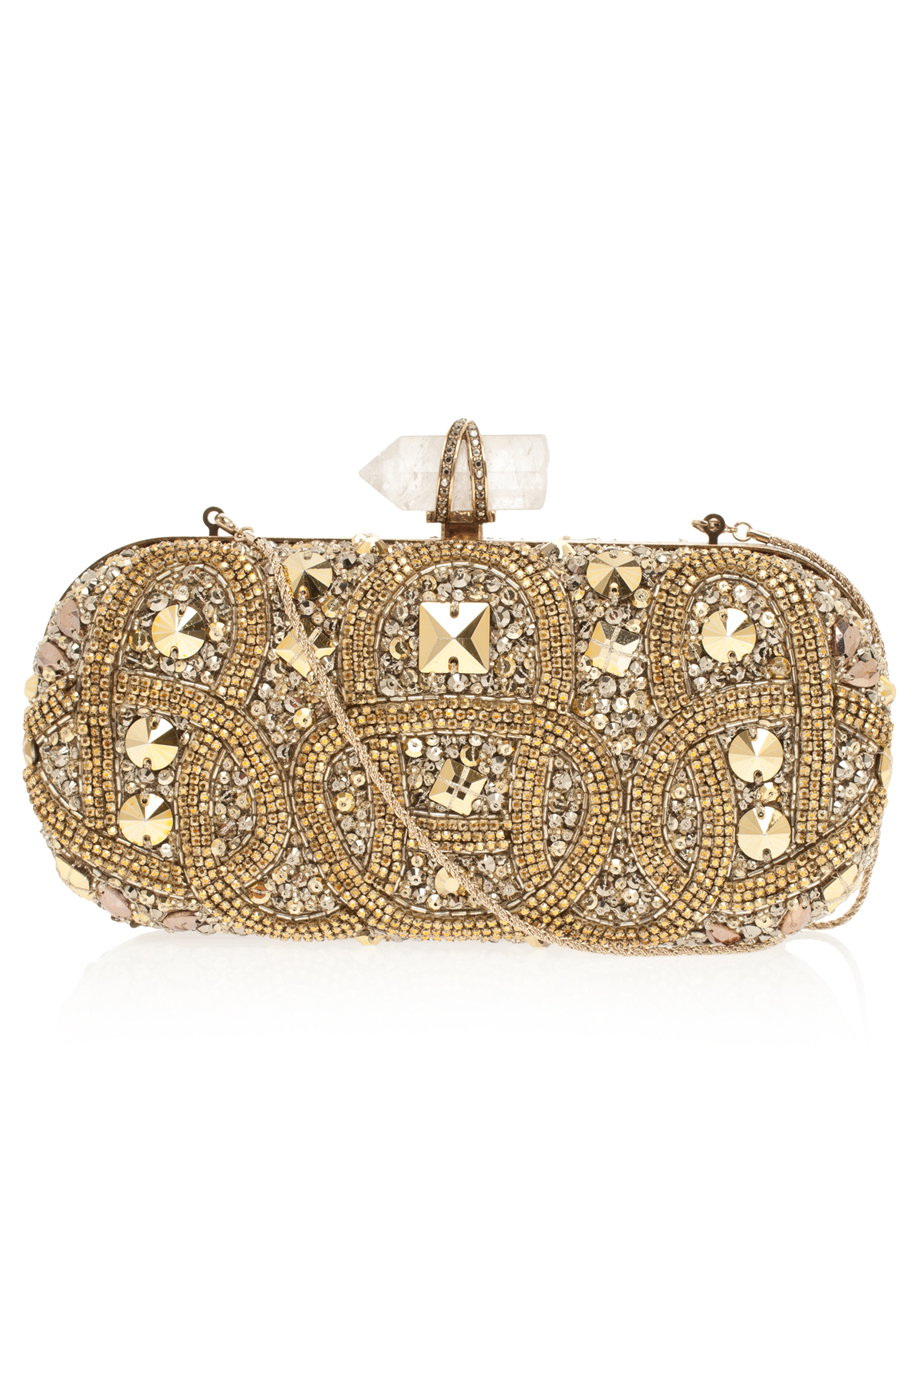 Lyst - Marchesa Lily Embroidered Clutch Bag in Metallic